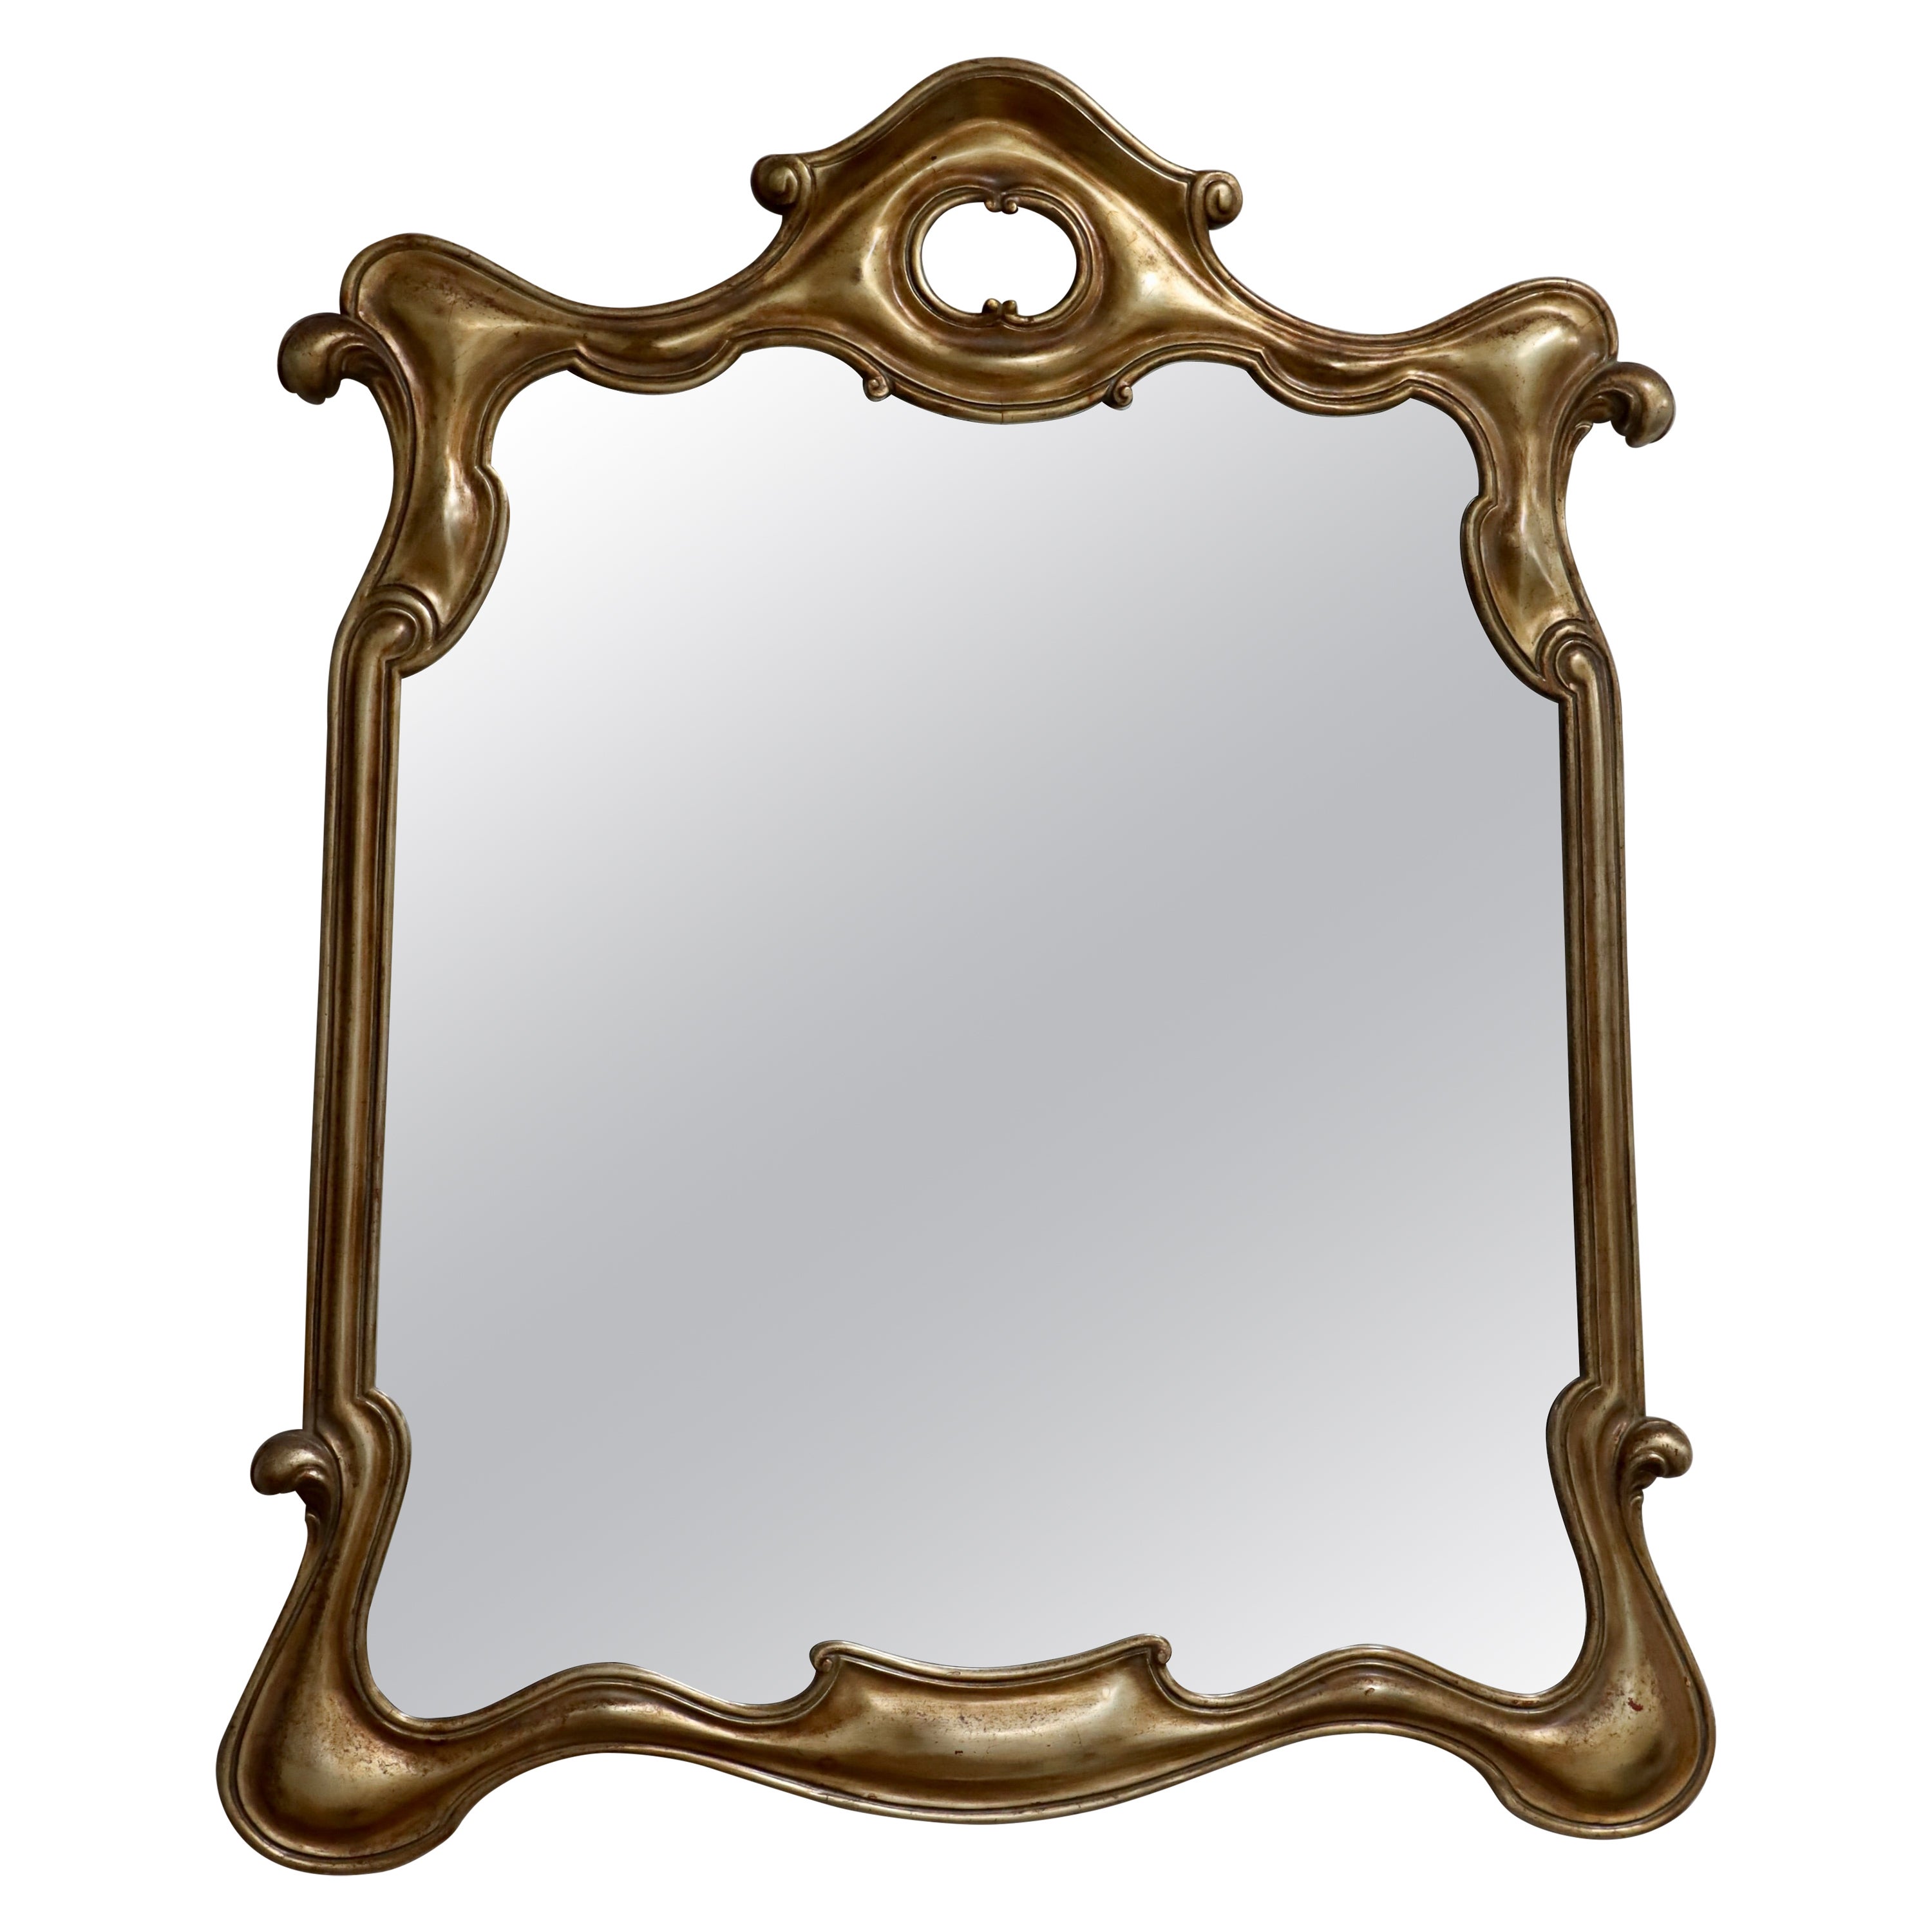 1940's Sculptural Large Gold And Silver Italian Wall Mirror For Sale